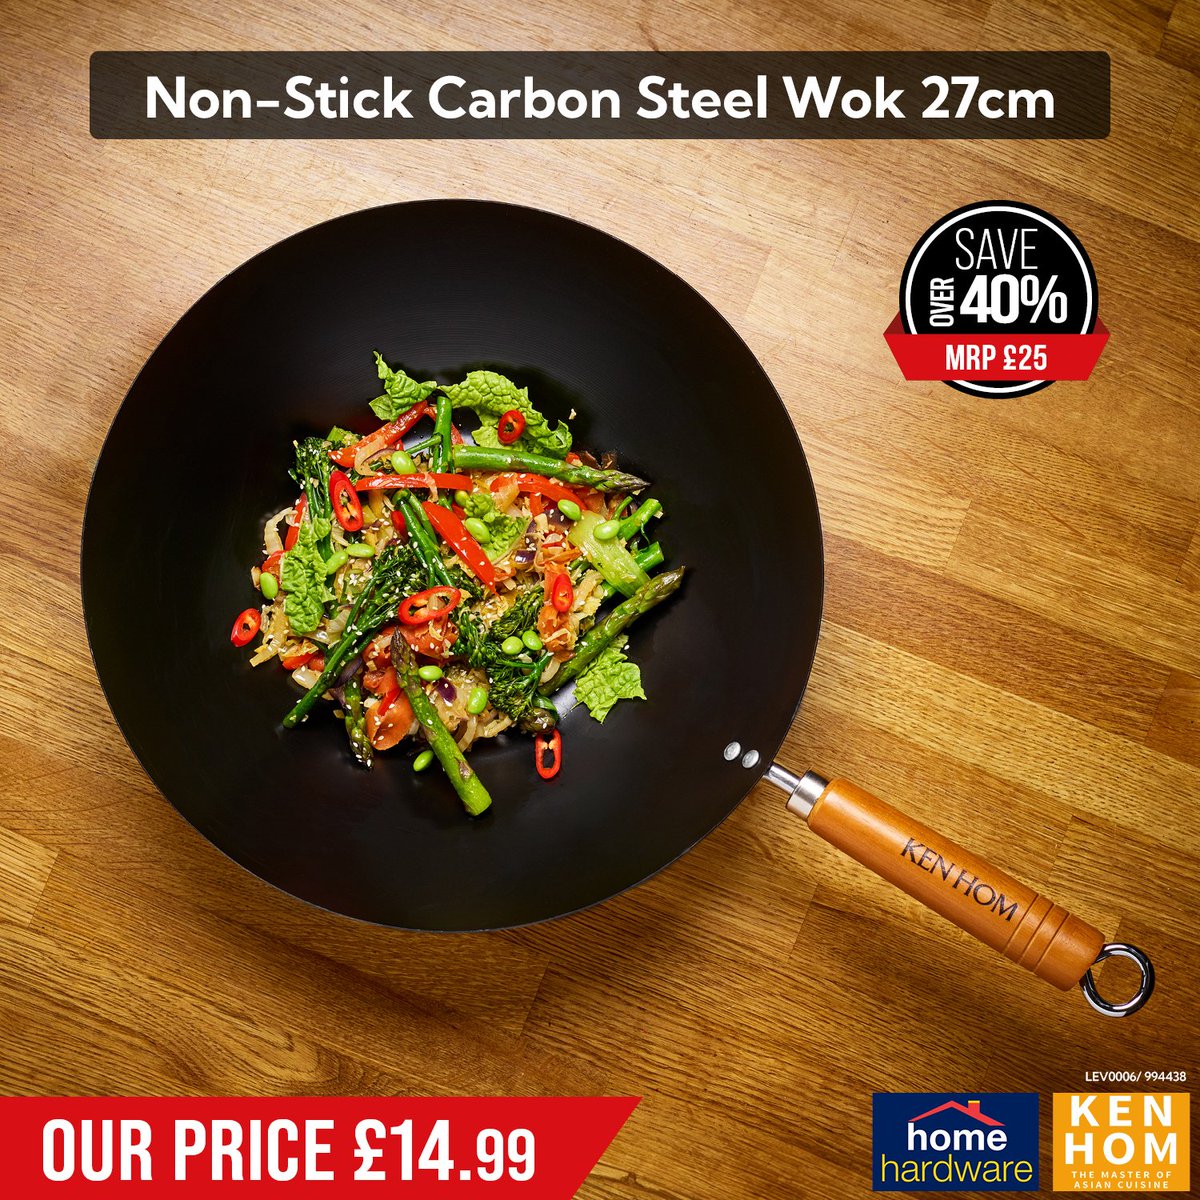 Stir-fry cooking is all about being quick, easy and healthy and this wok has been designed to assist with achieving that.

Why would you not love that in January?

#healthycooking #kenhom #january #shoplocal